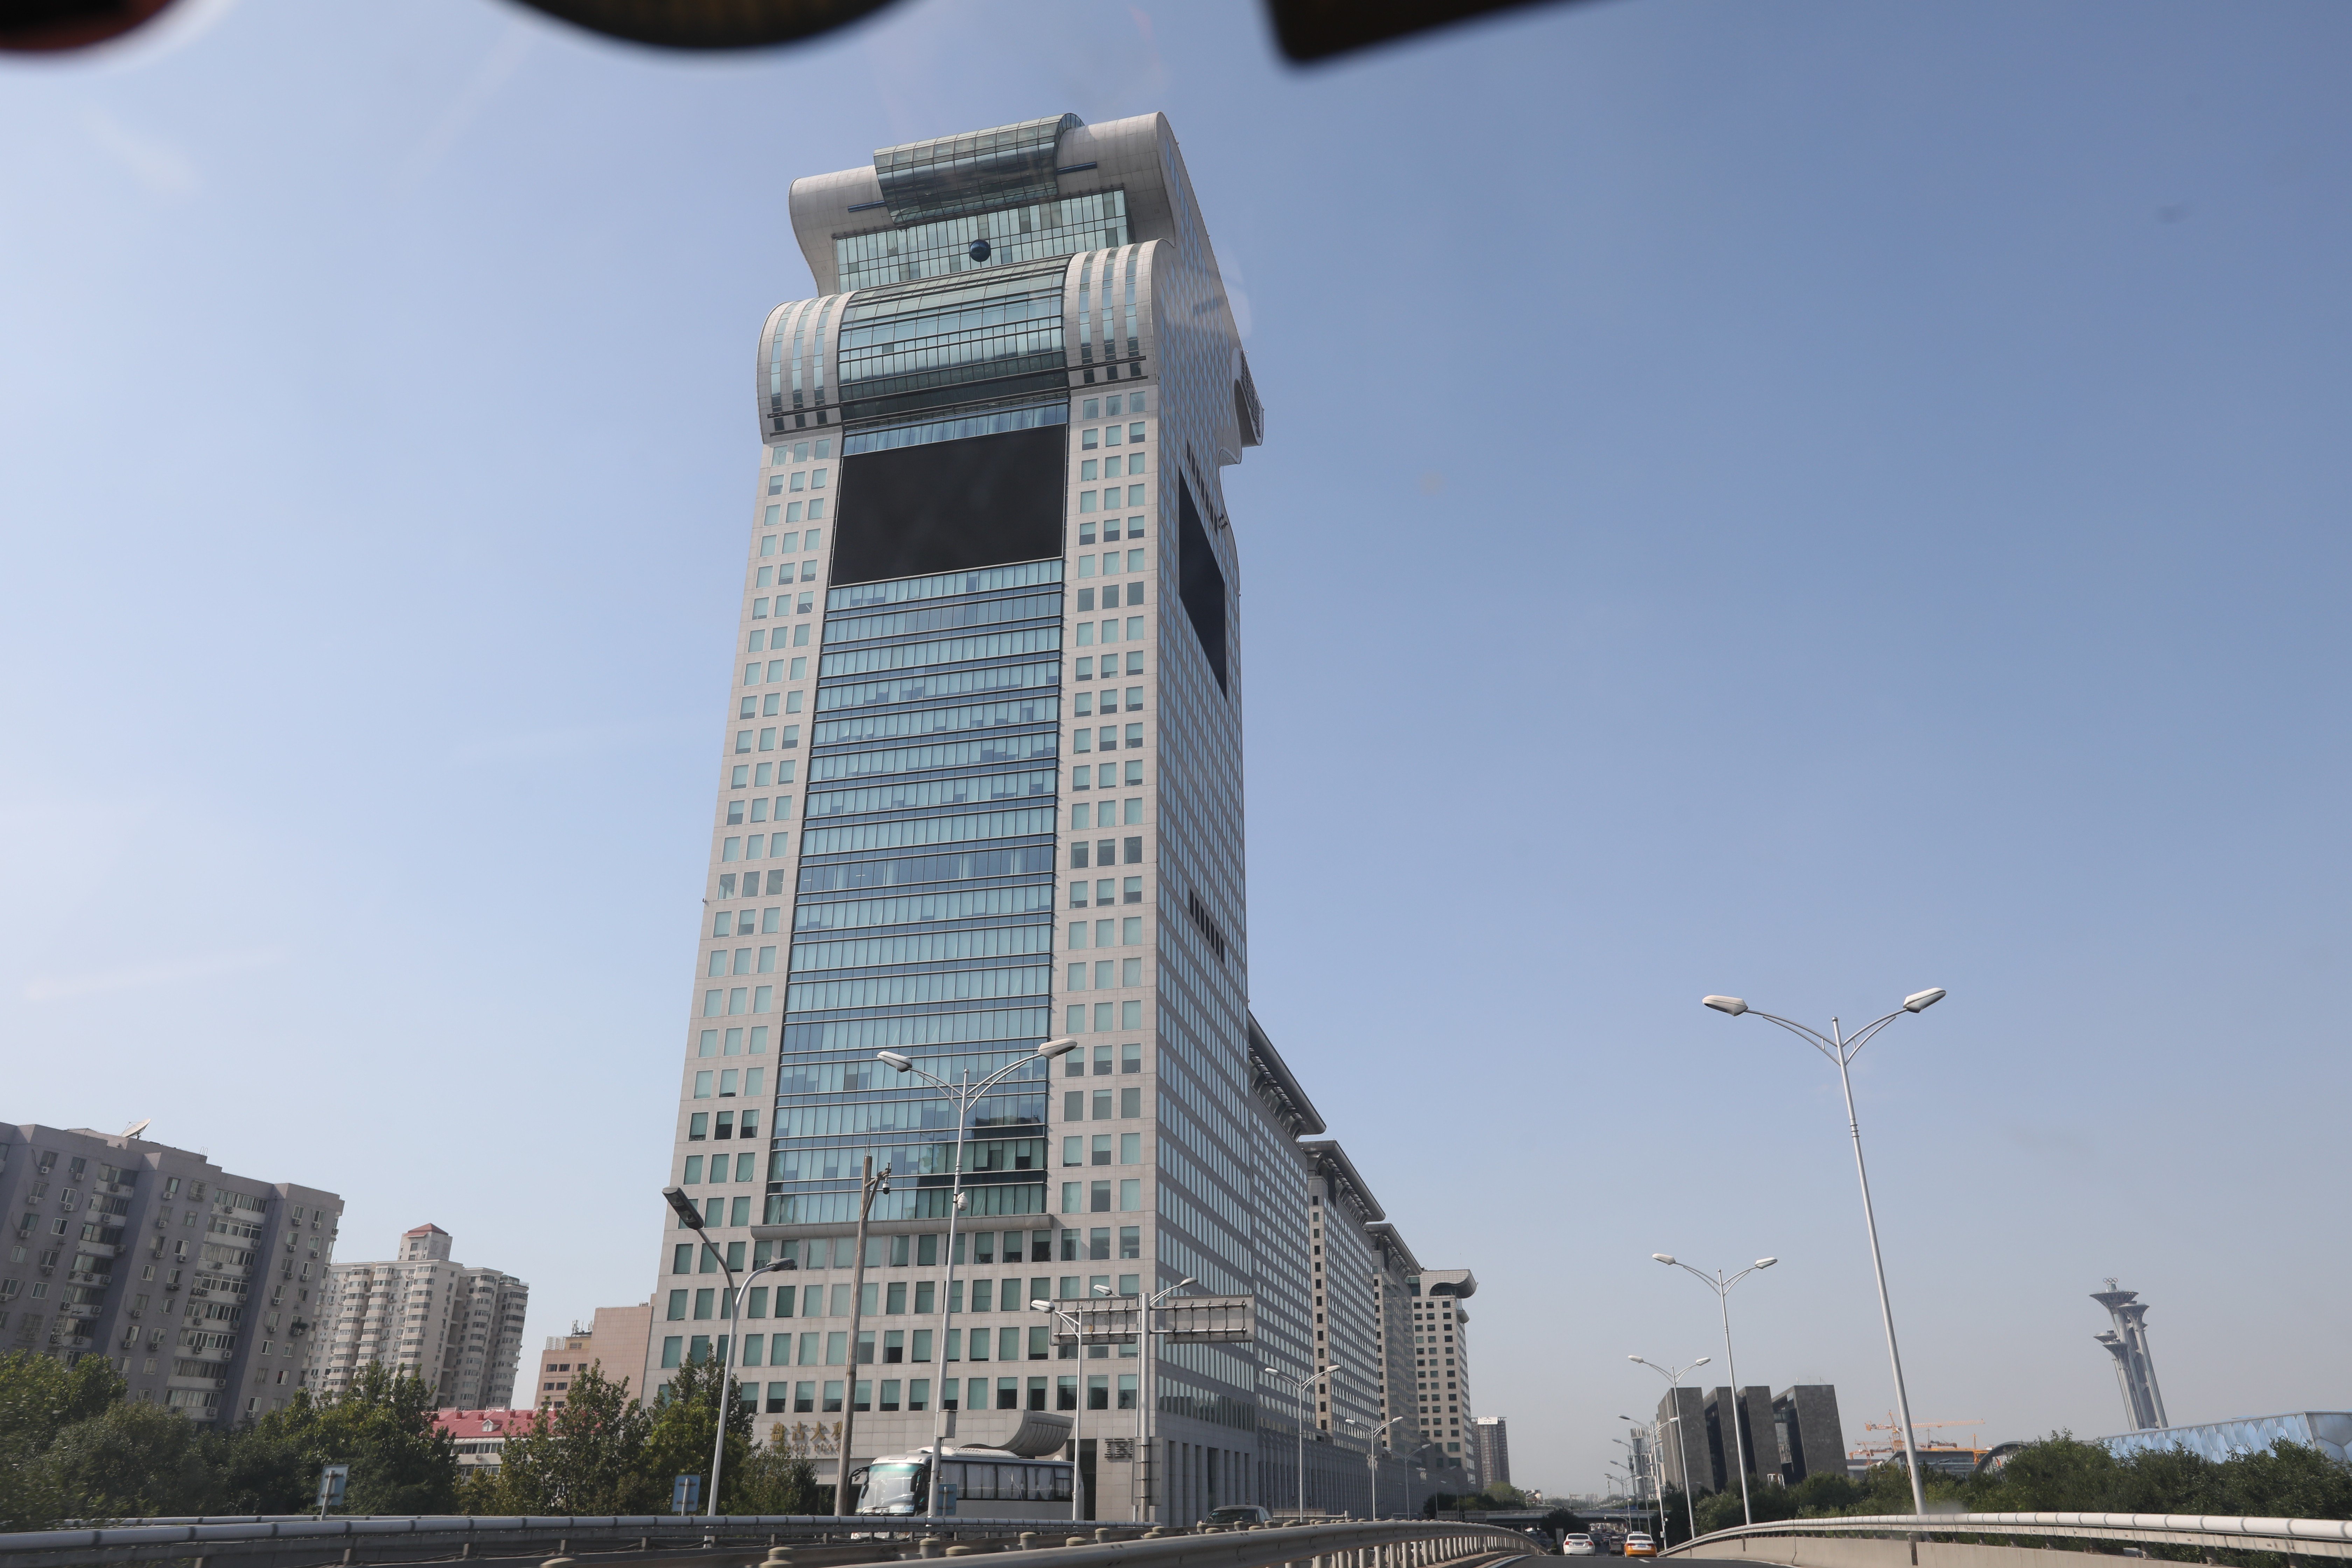 Pangu Tower, a high-rise office building north of the 4th Ring Road, is pictured in Beijing on August 15, 2019. Photo: Simon Song